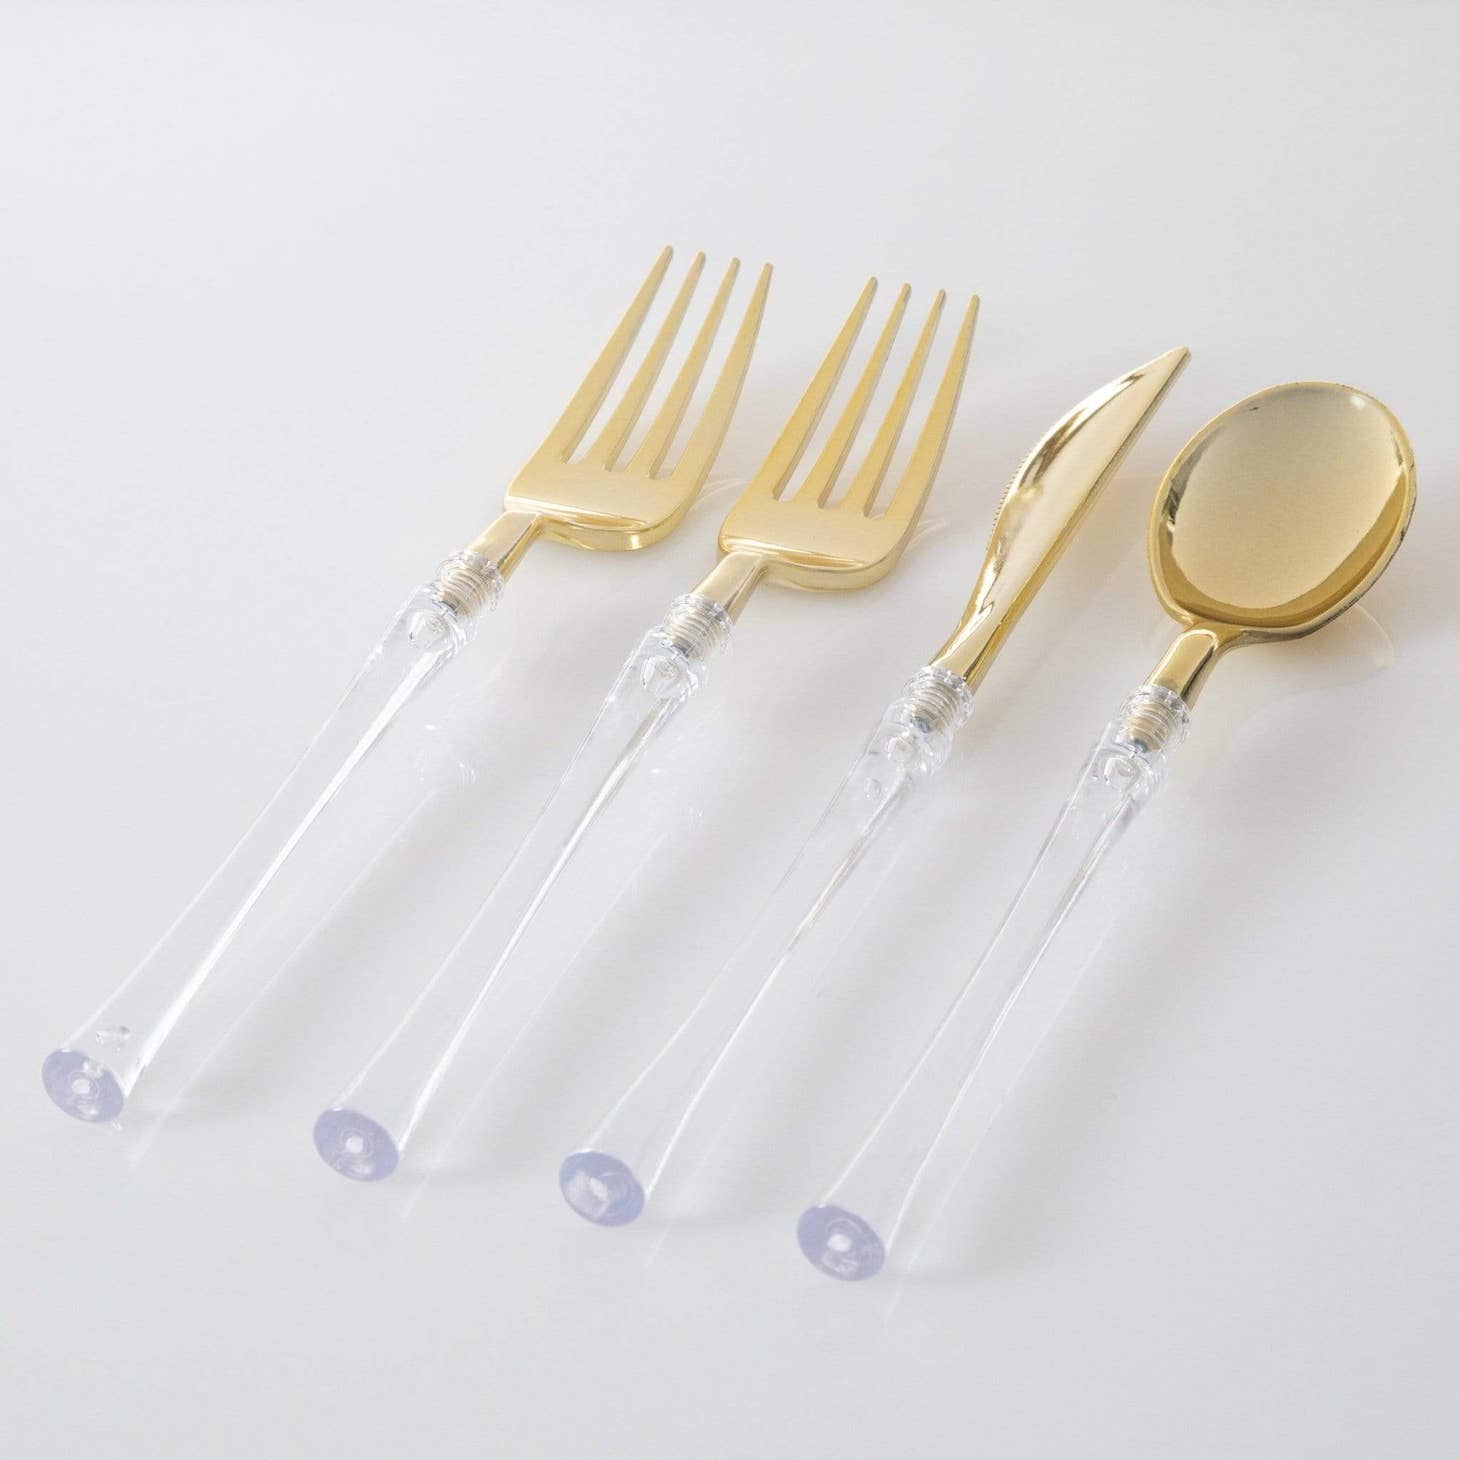 Clear & Gold Plastic Cutlery Set - Favorite Little Things Co